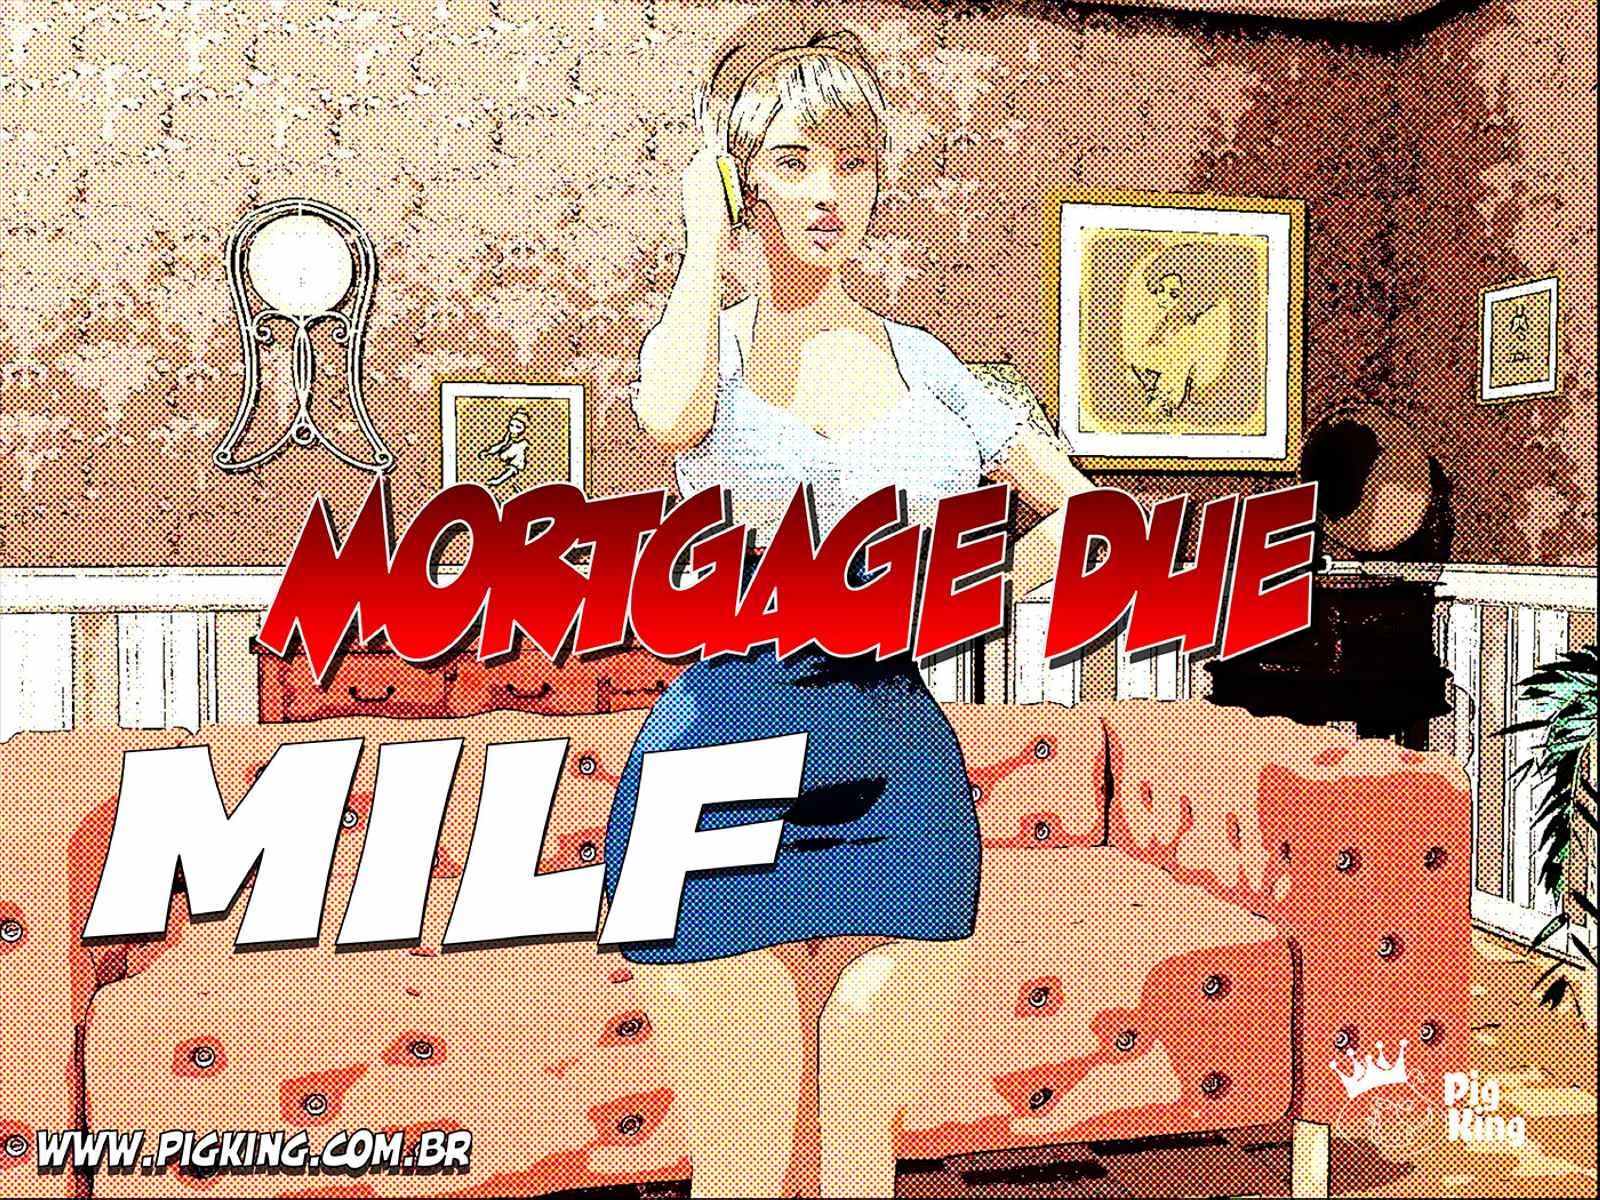 Mortgage Due Milf Pig King page 1